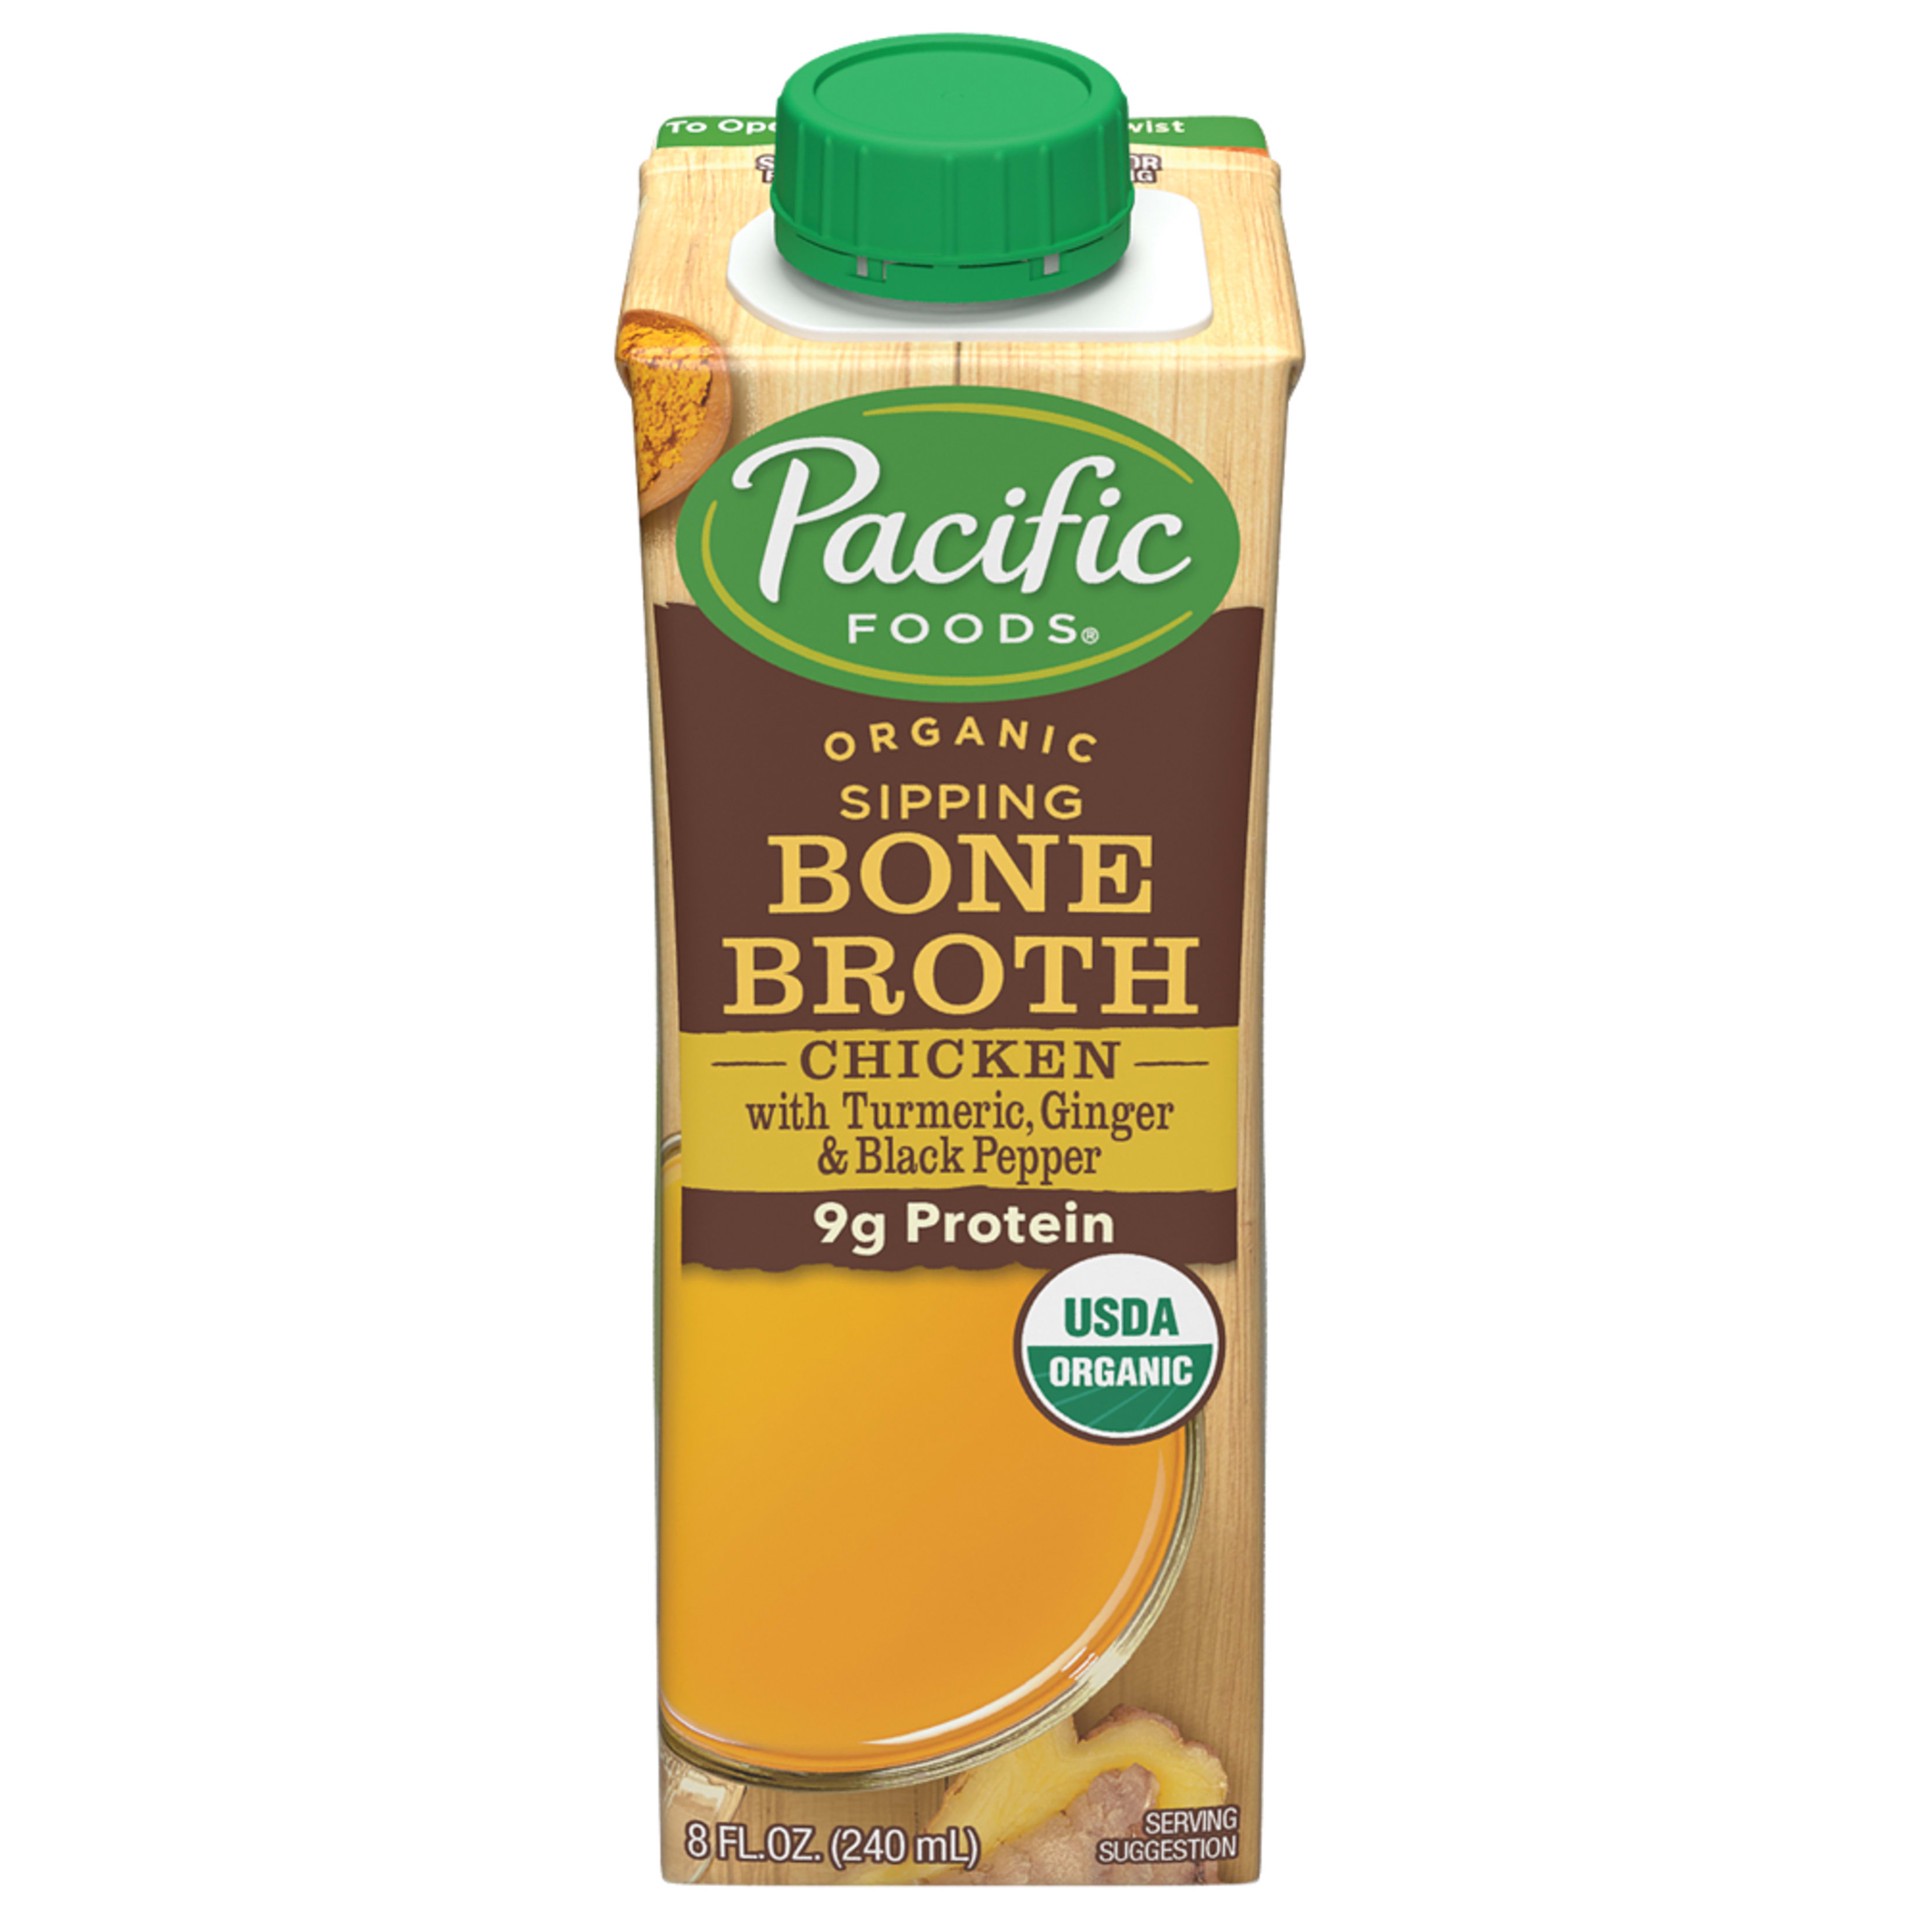 slide 1 of 8, Pacific Foods Organic Chicken Bone Broth with Turmeric, Ginger, & Black Pepper, 8oz, 8 oz